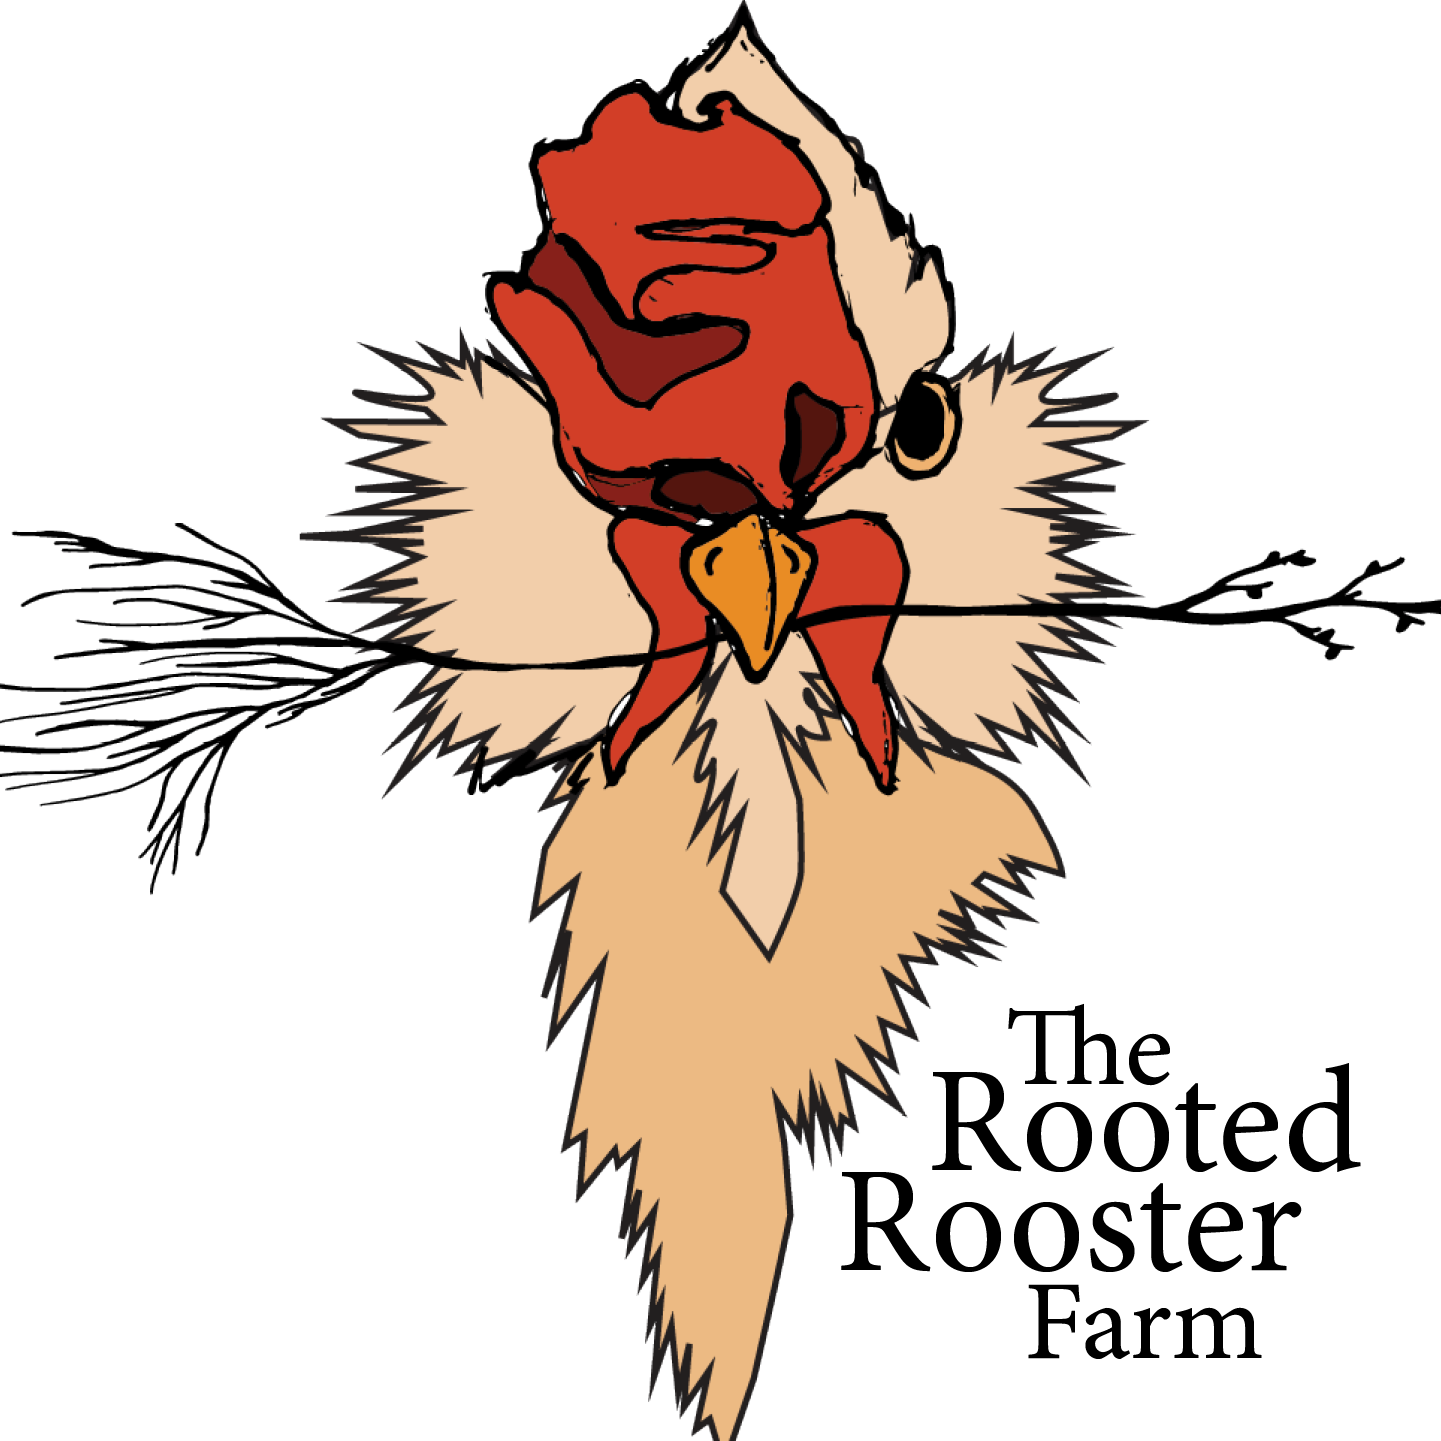 The Rooted Rooster Farm